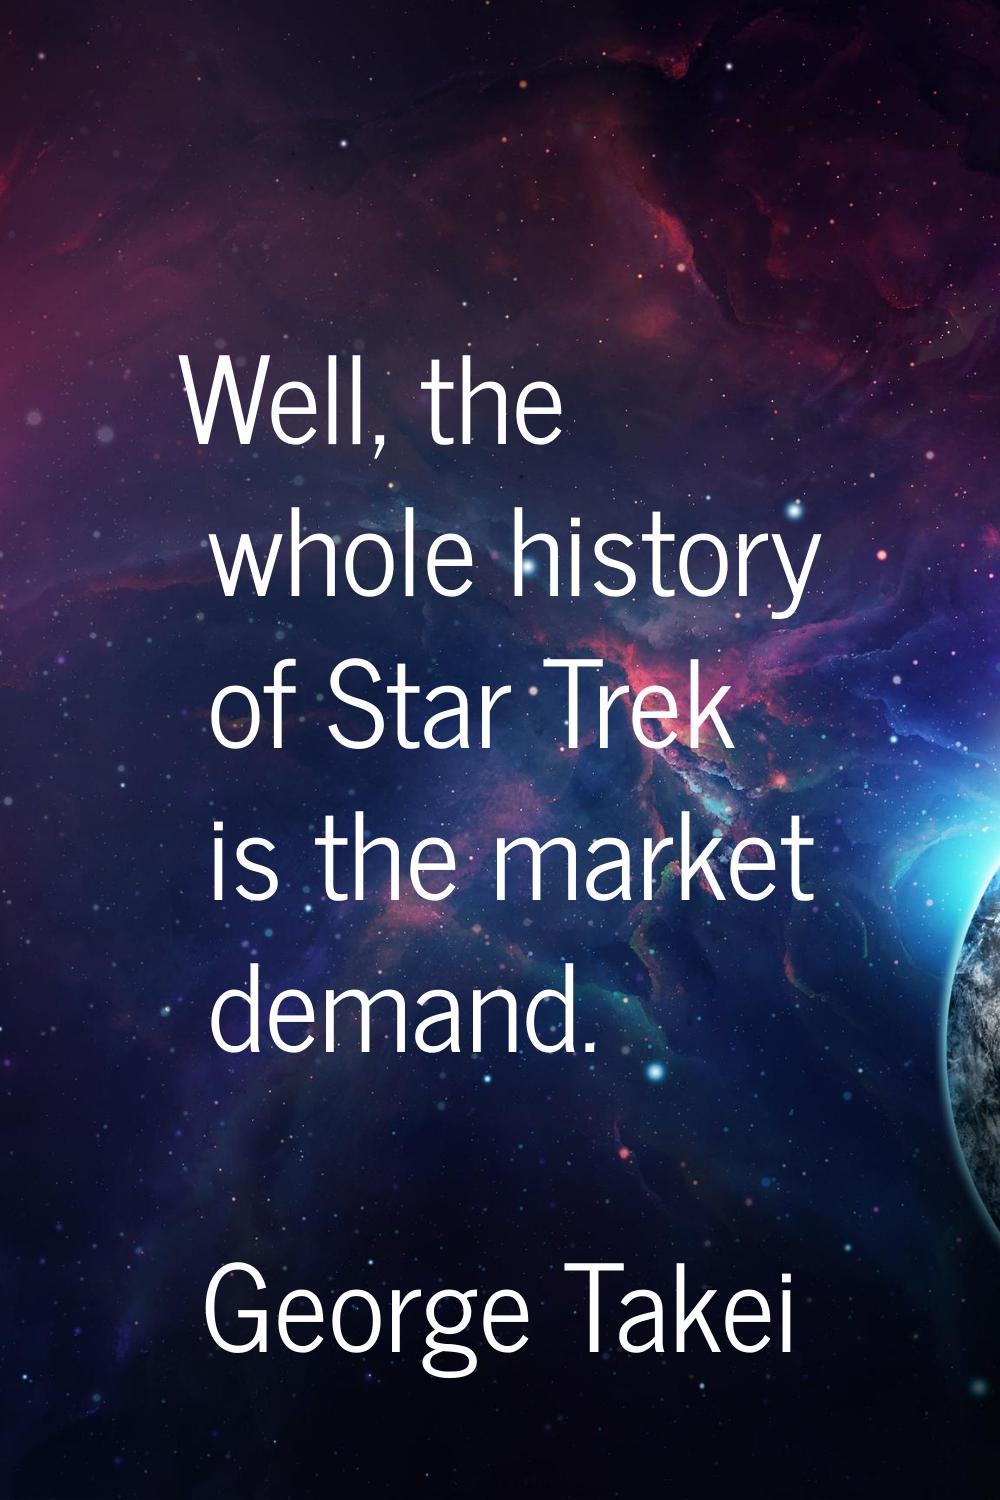 Well, the whole history of Star Trek is the market demand.